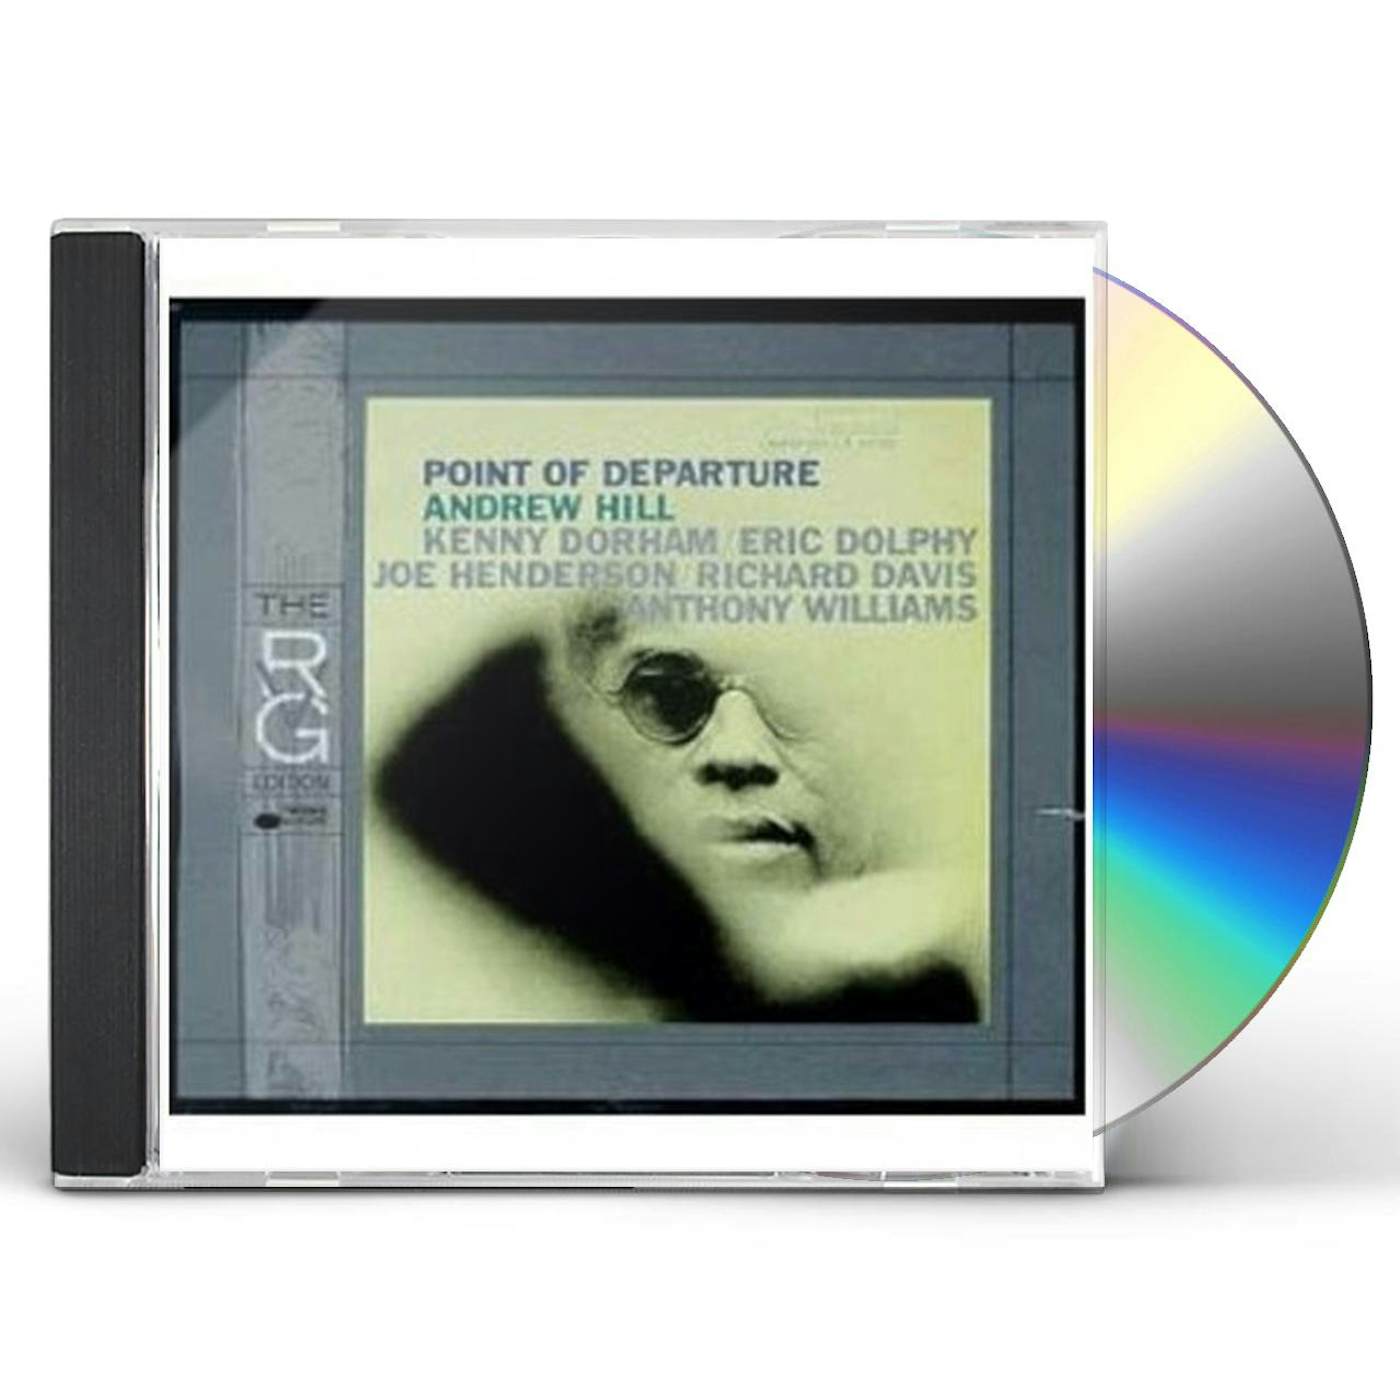 Andrew Hill POINT OF DEPARTURE CD